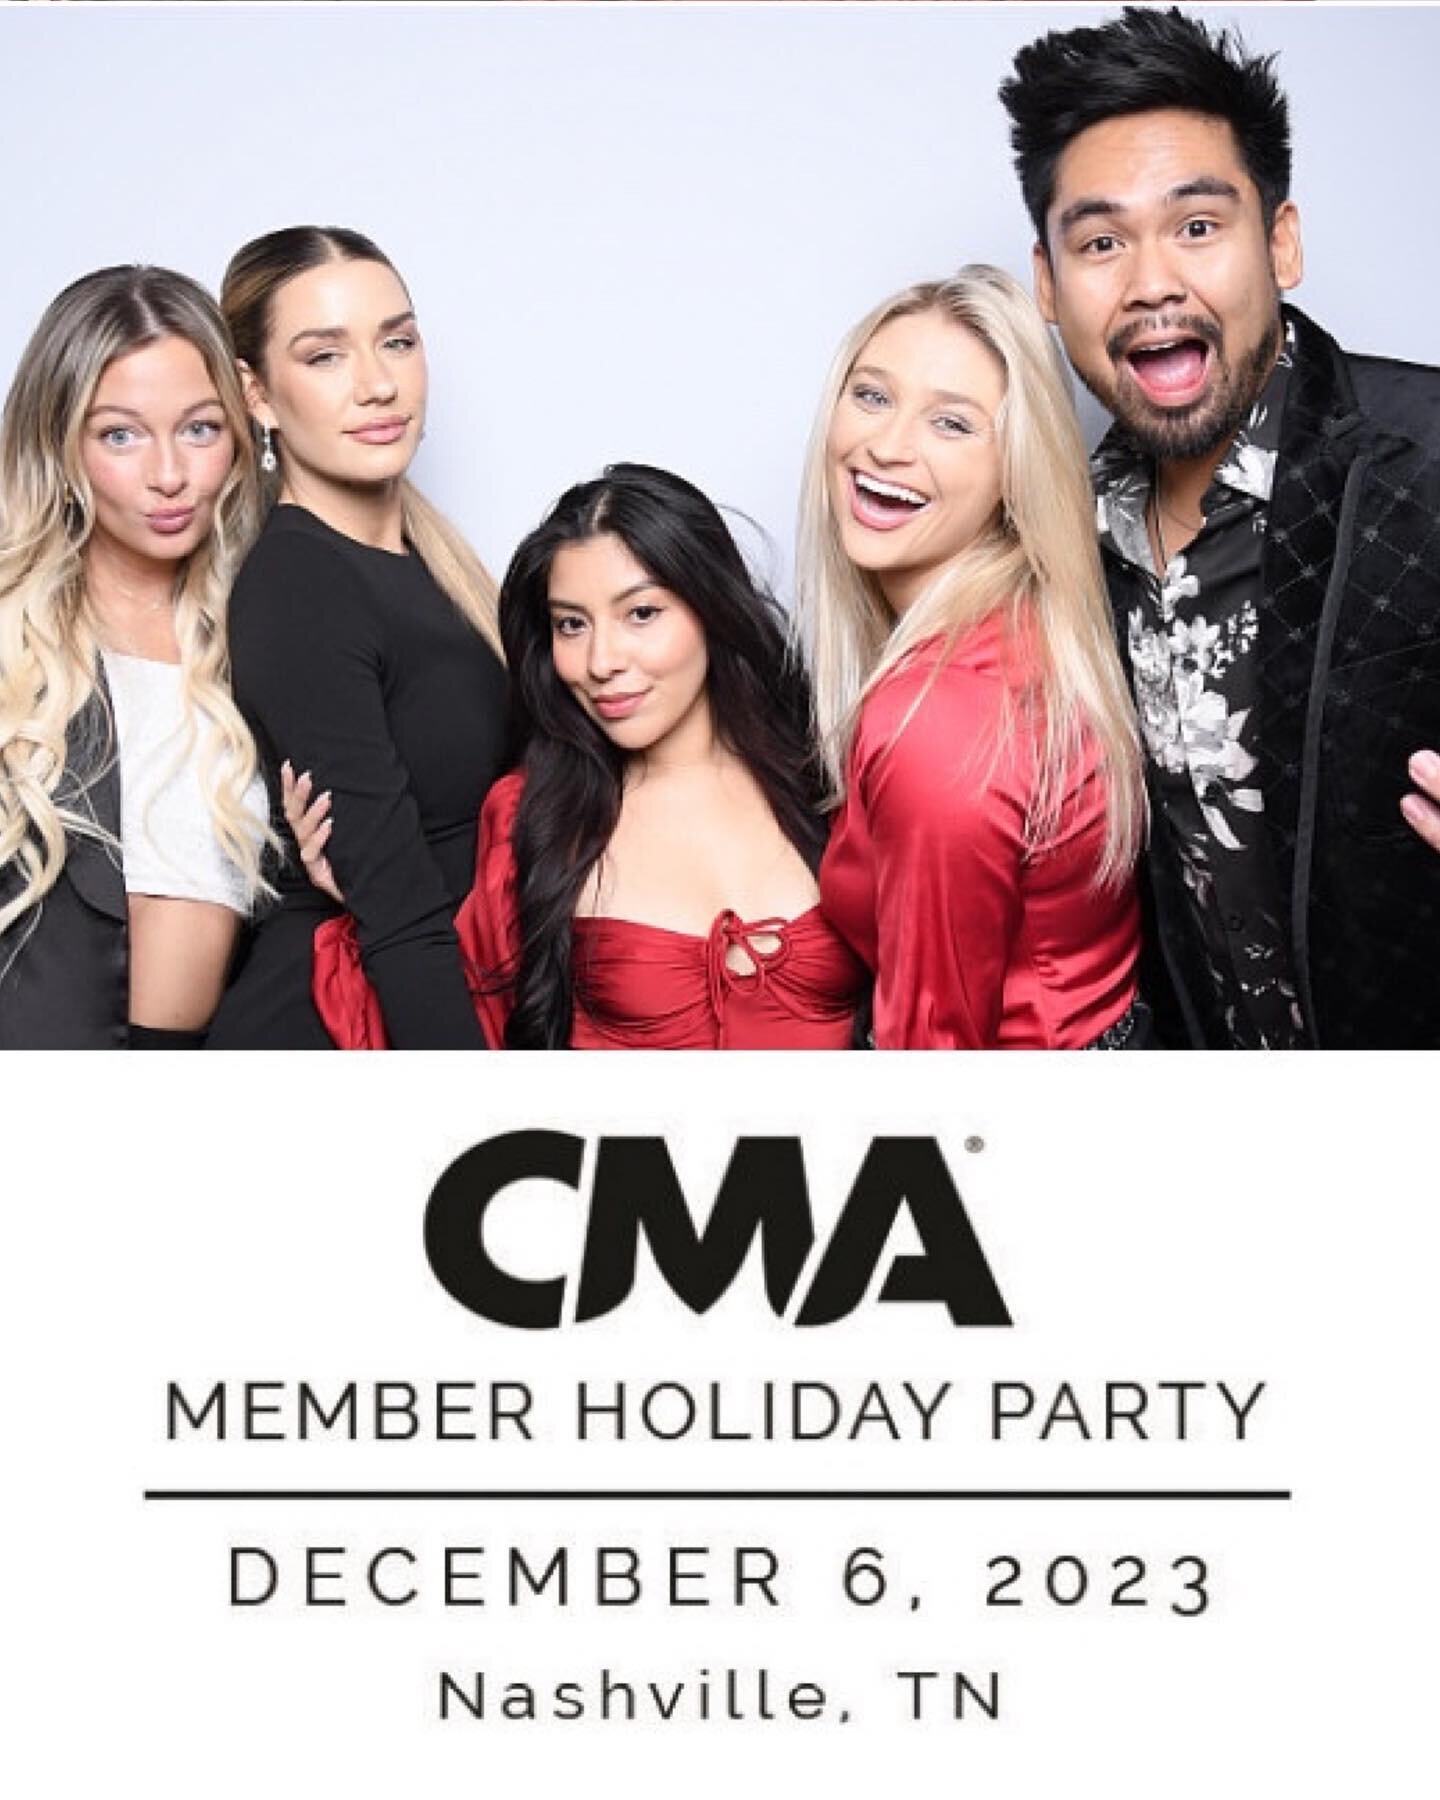 loved catching up with old pals &amp; connecting with new folks from all walks of life in Country Music 🎶 

thanks for having me @cma 🙏
#cma #holidayparty #nashville #countrychristmas #member